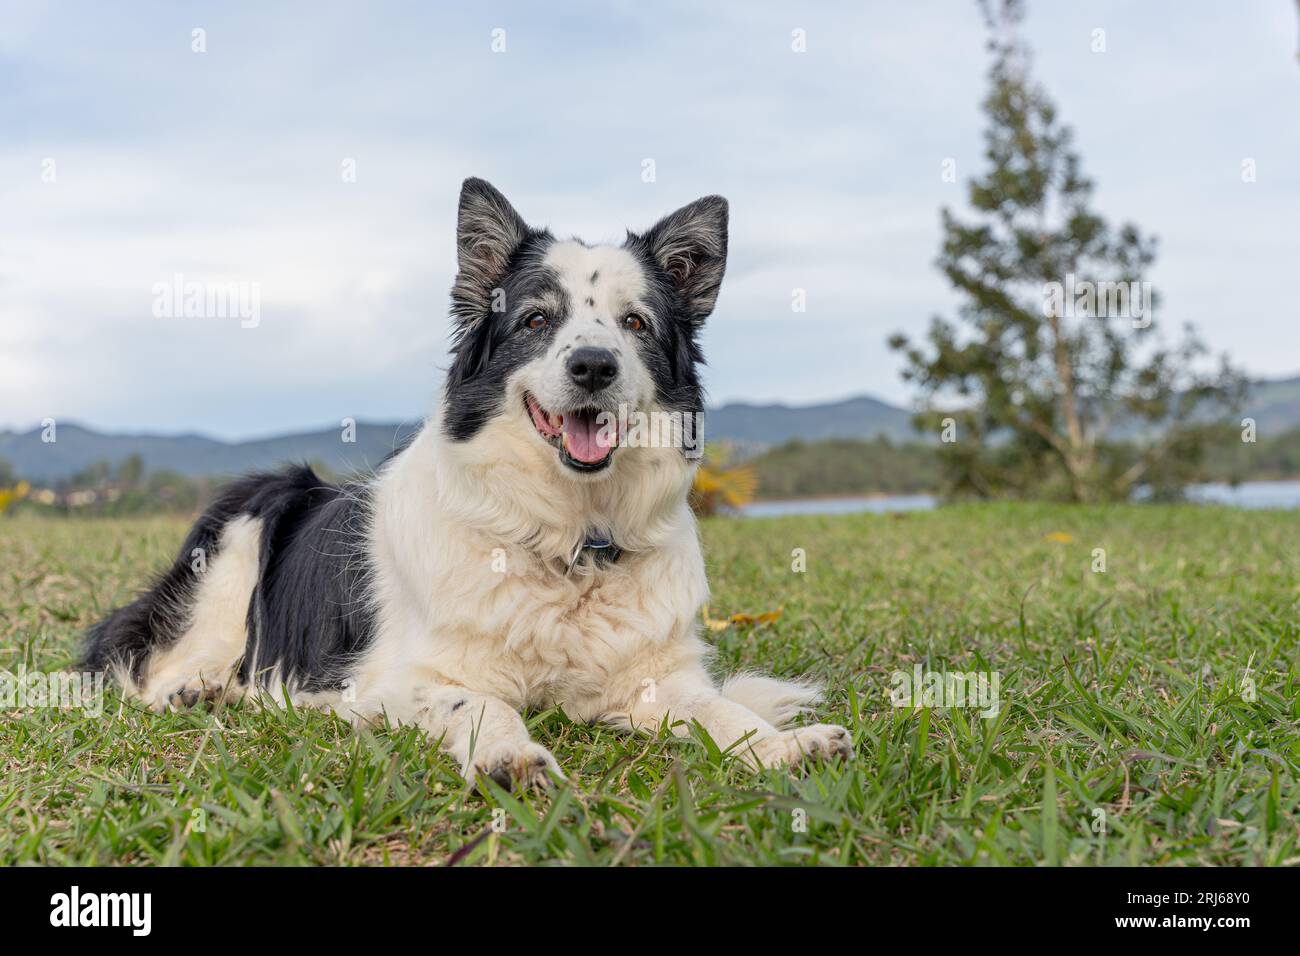 A cheerful Border Collie dog sprawled out on the lush grass at the edge of the beach Stock Photo